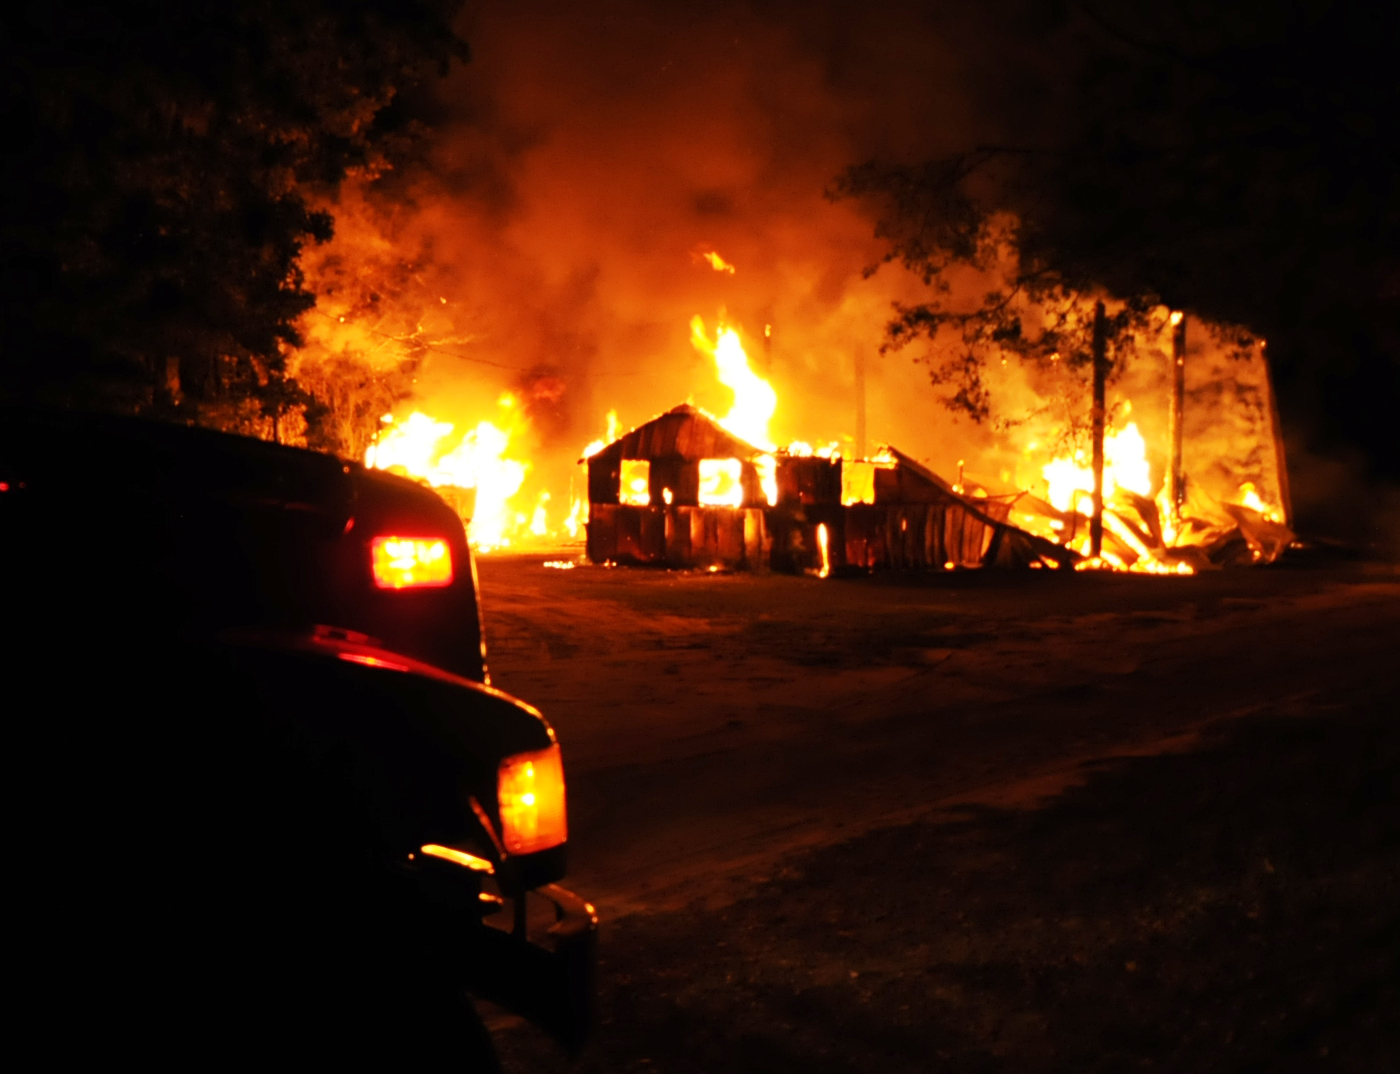 Trash fire spreads, burning large storage shed and travel 